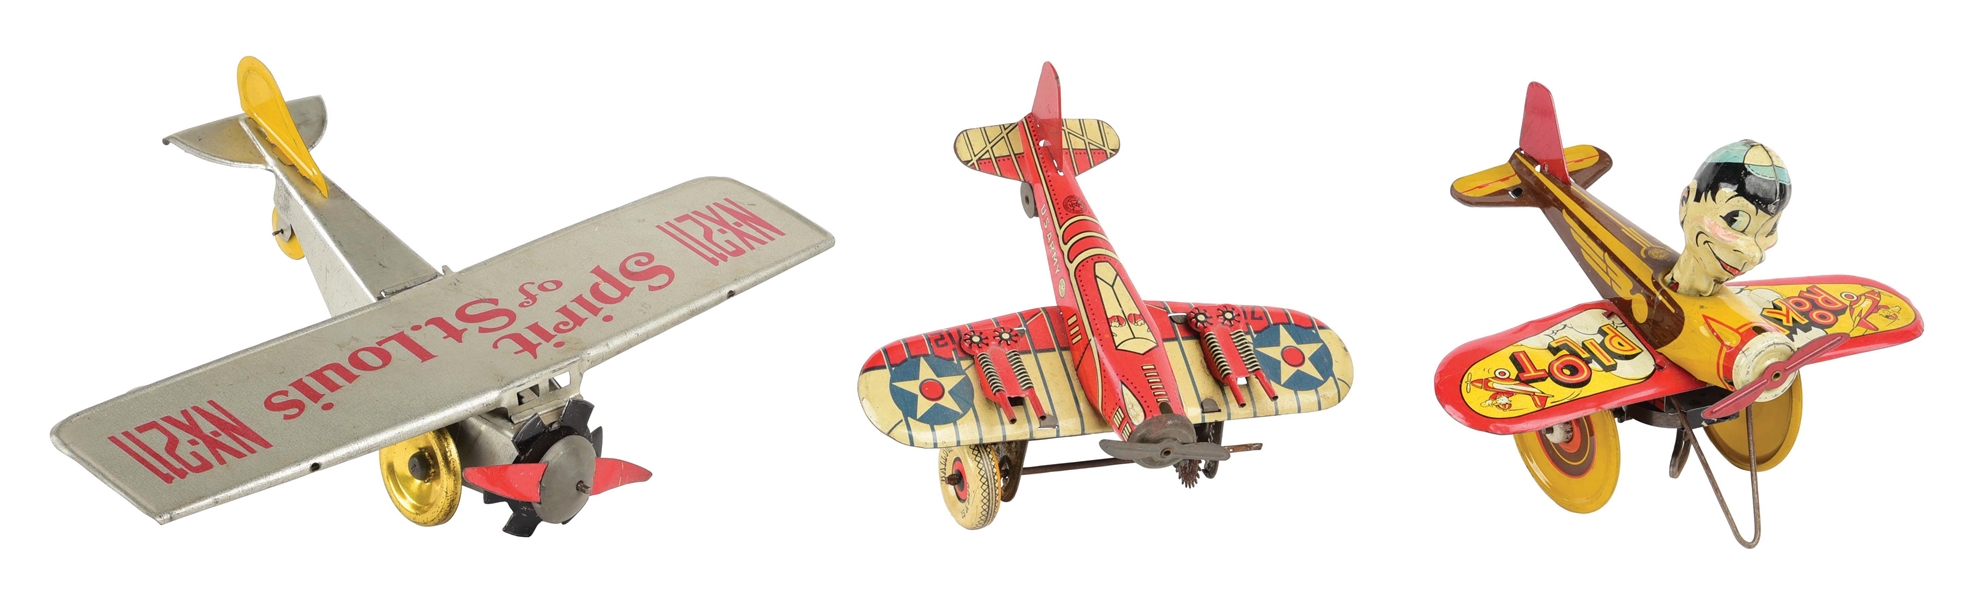 LOT OF 3: EARLY TIN LITHO WIND-UP AMERICAN MADE TOY AIRPLANES.